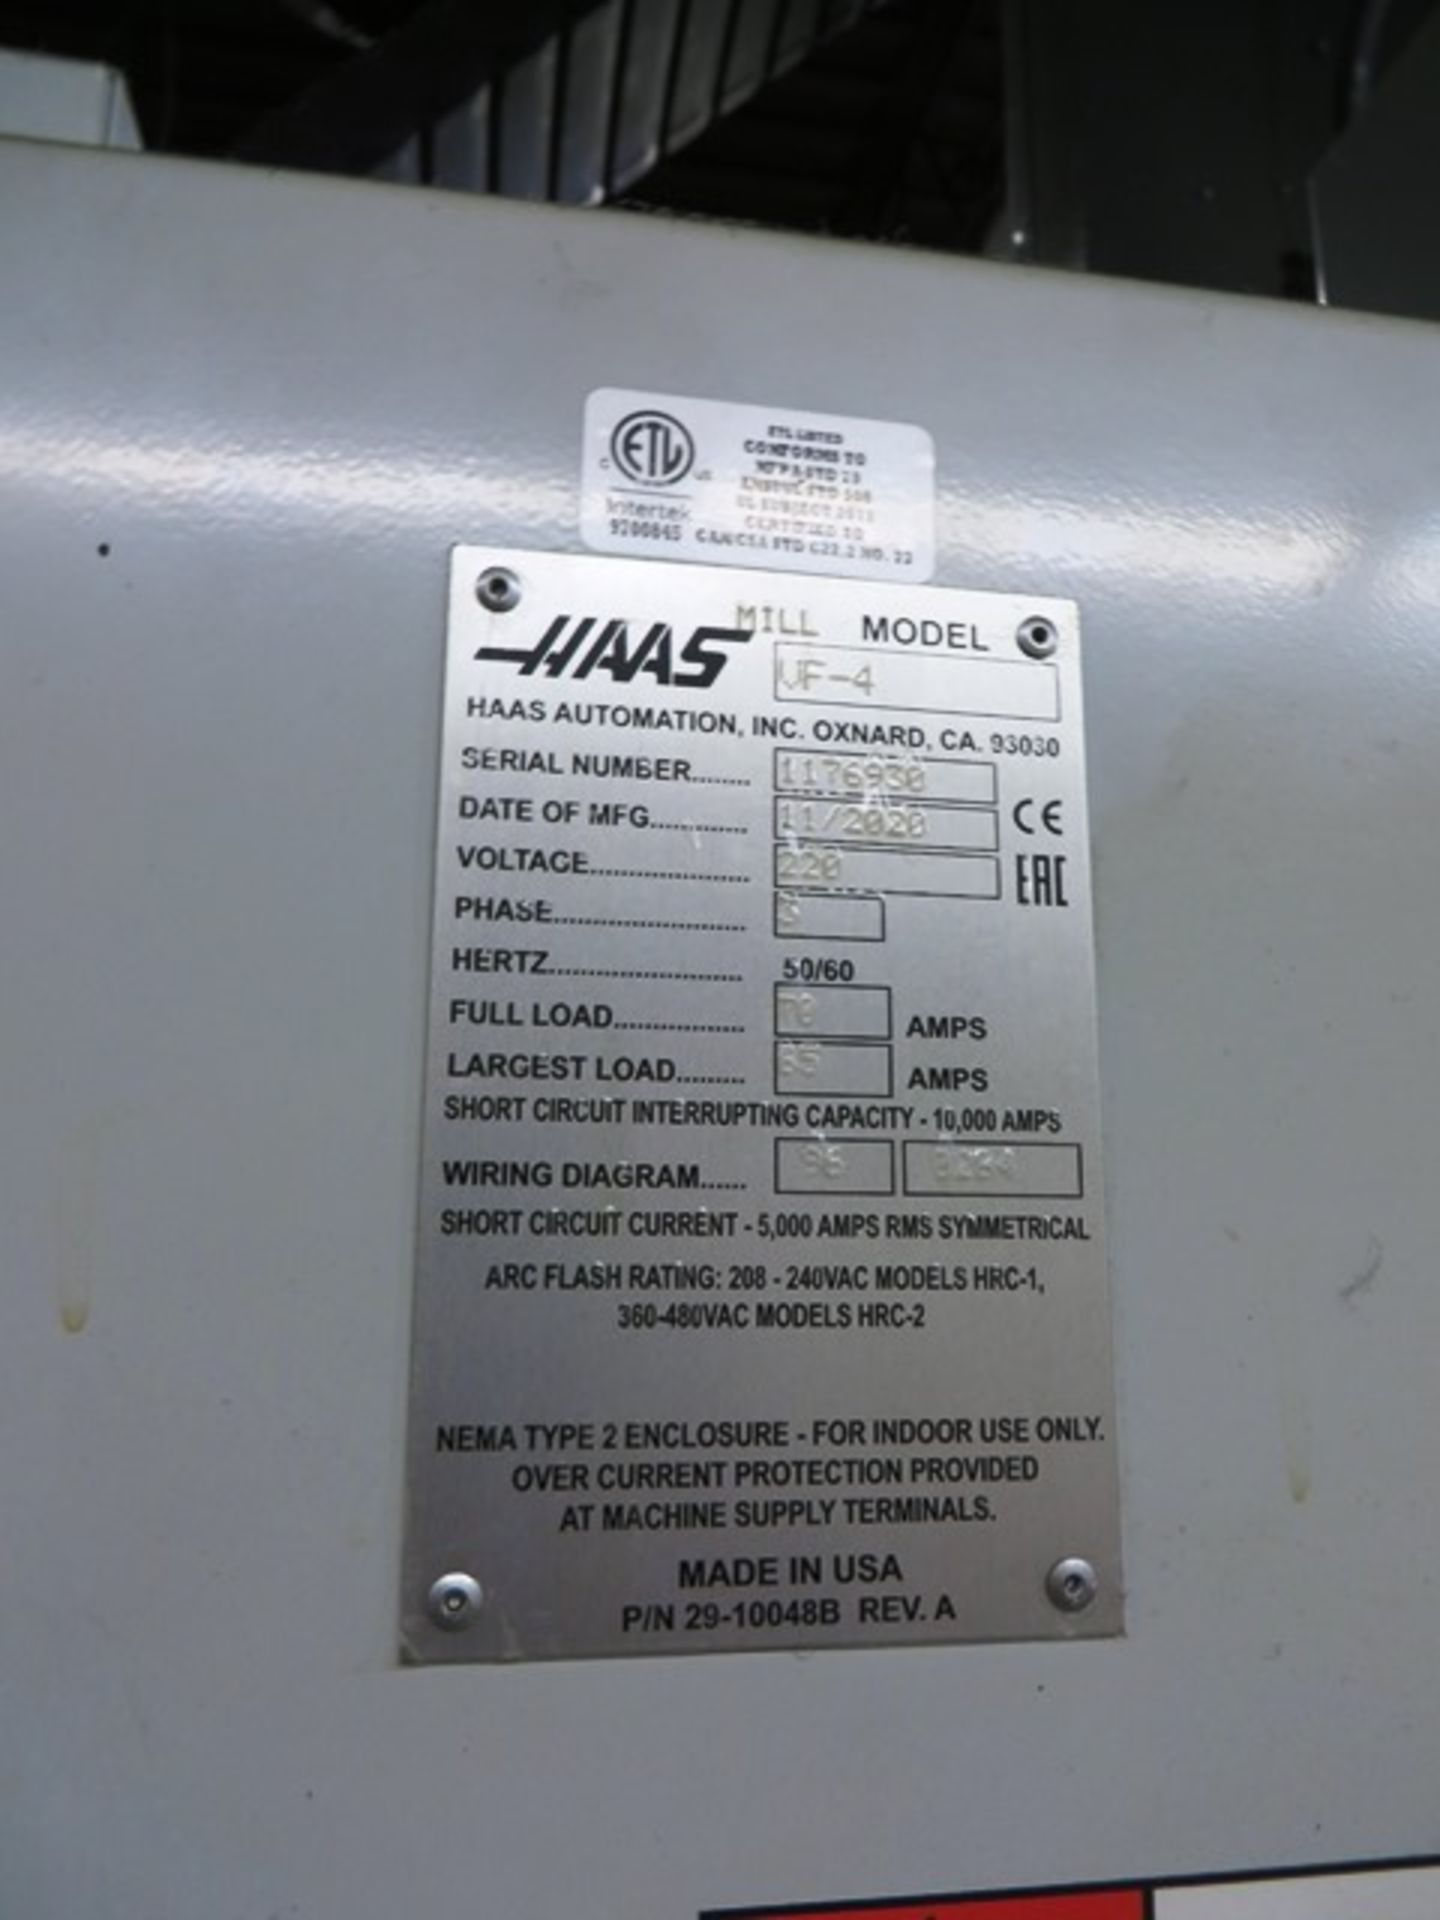 Haas VF-4 3-Axis CNC Vertical Machining Center - Image 6 of 6